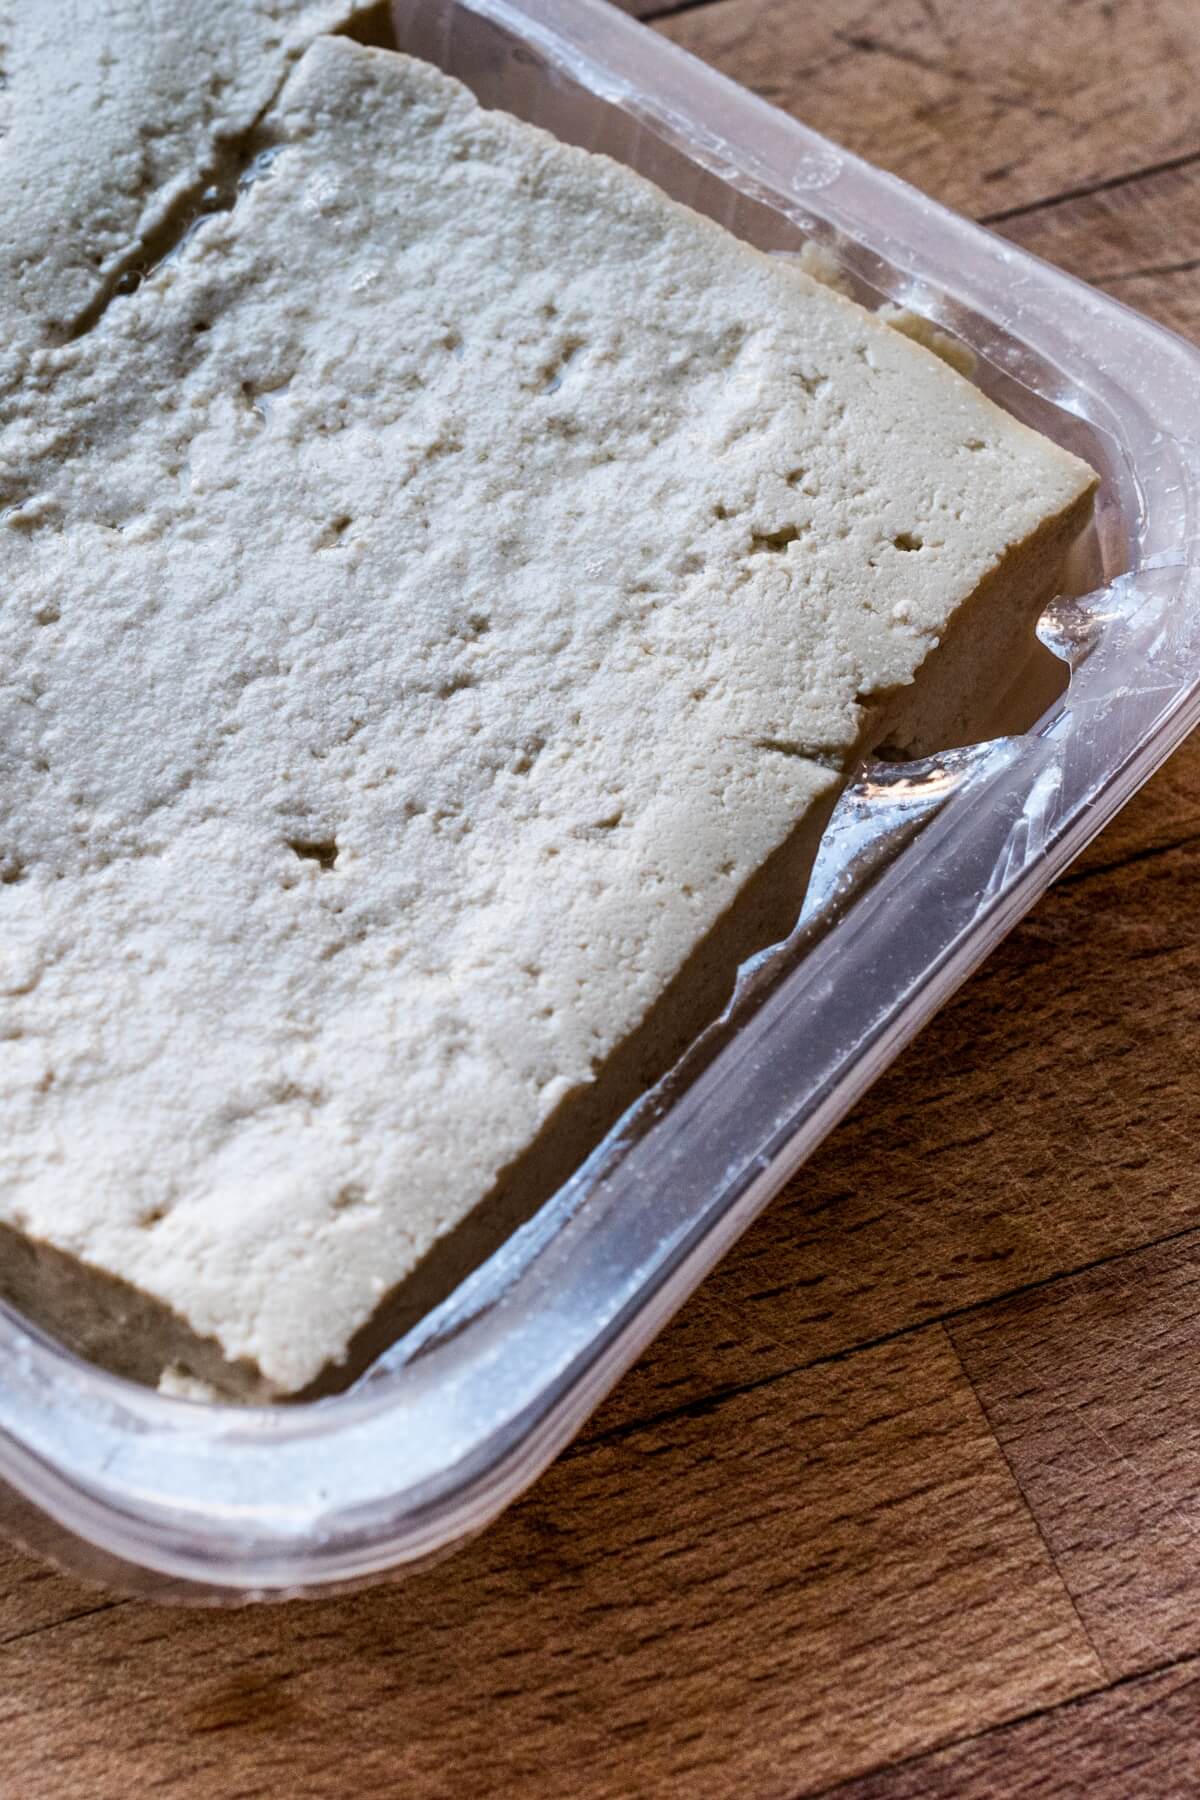 A block of tofu in a plastic package.